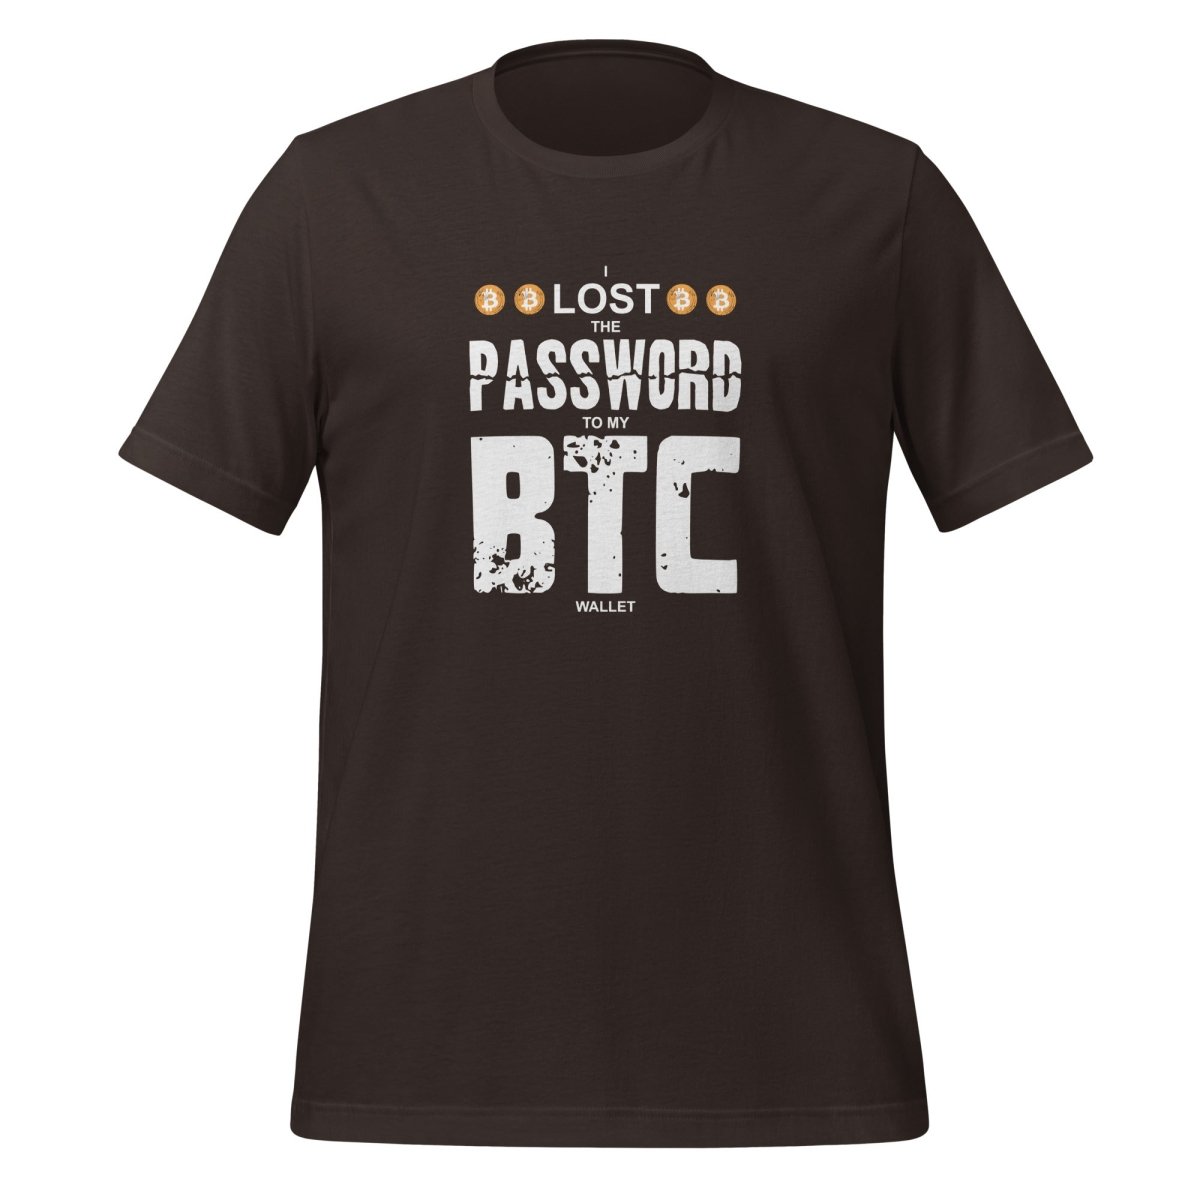 I Lost the Password to my Bitcoin Wallet T - Shirt (unisex) - Brown - AI Store